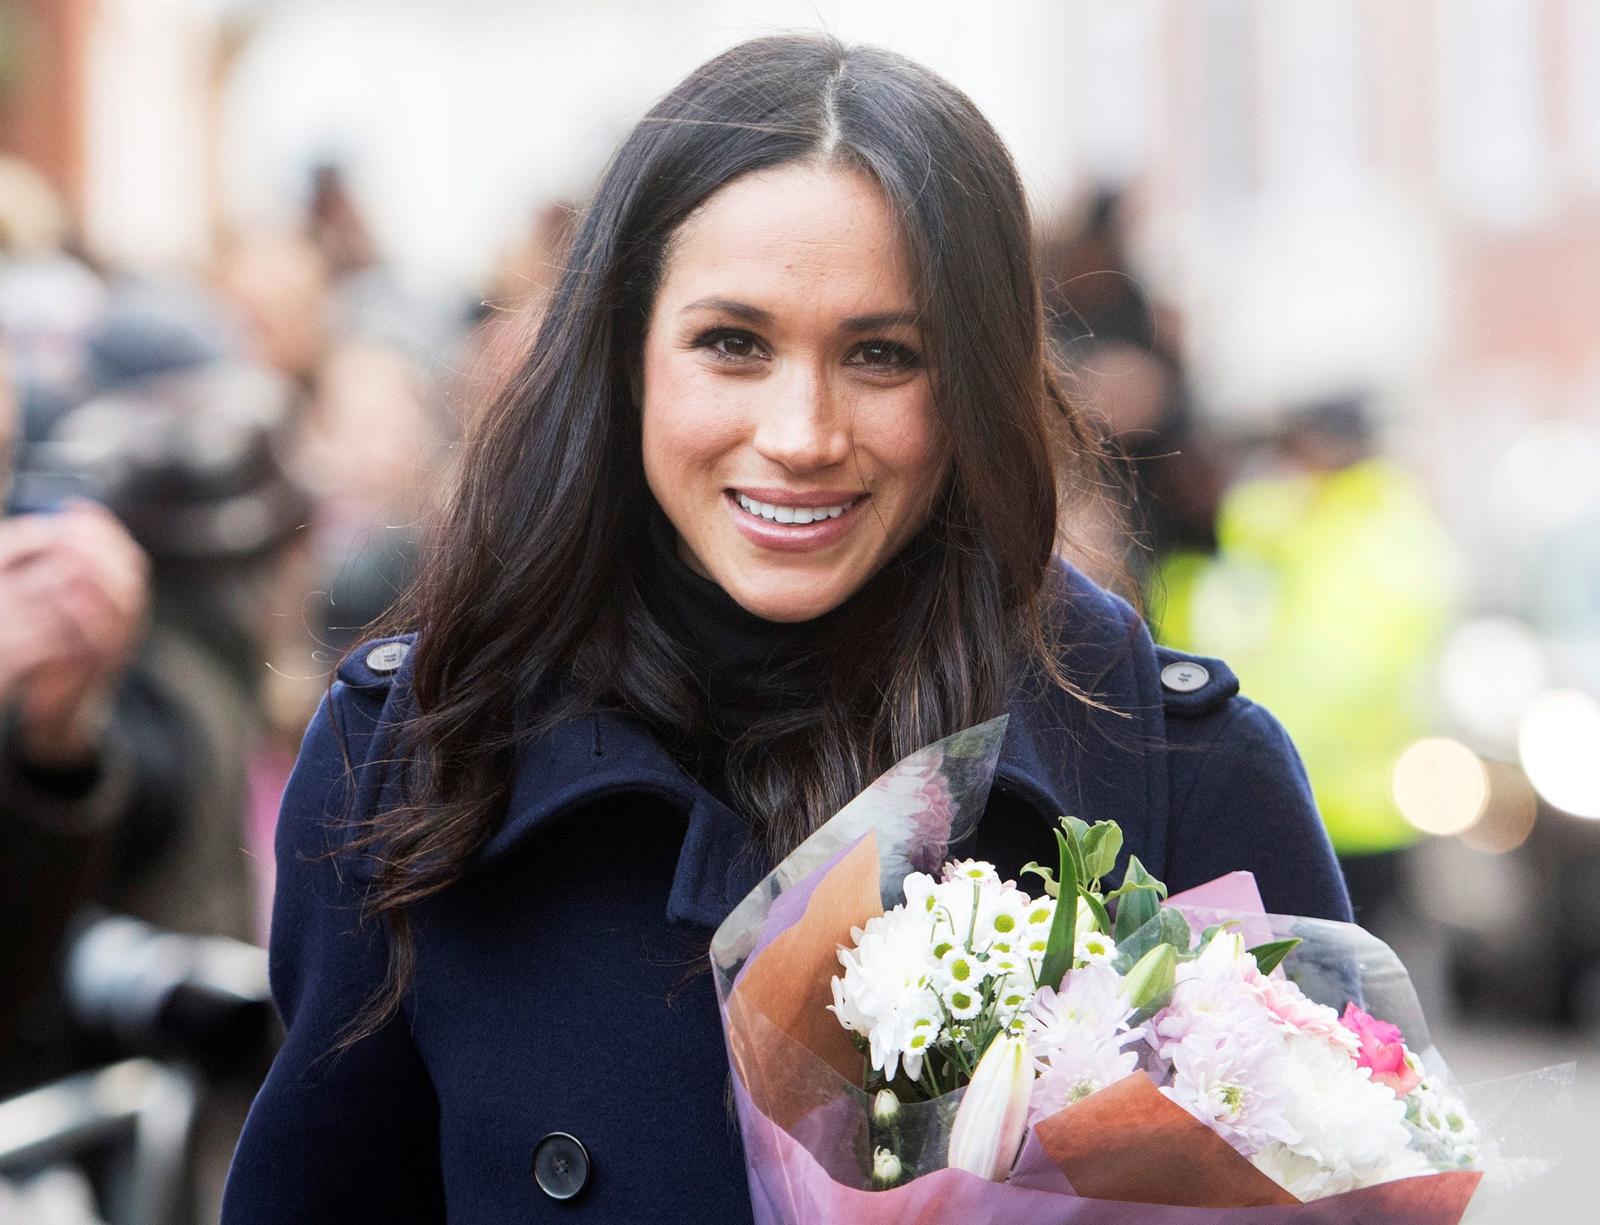 Meghan Markle arrives at an event she is attending with her fiancee Britain’s Prince Harry in Nottingham